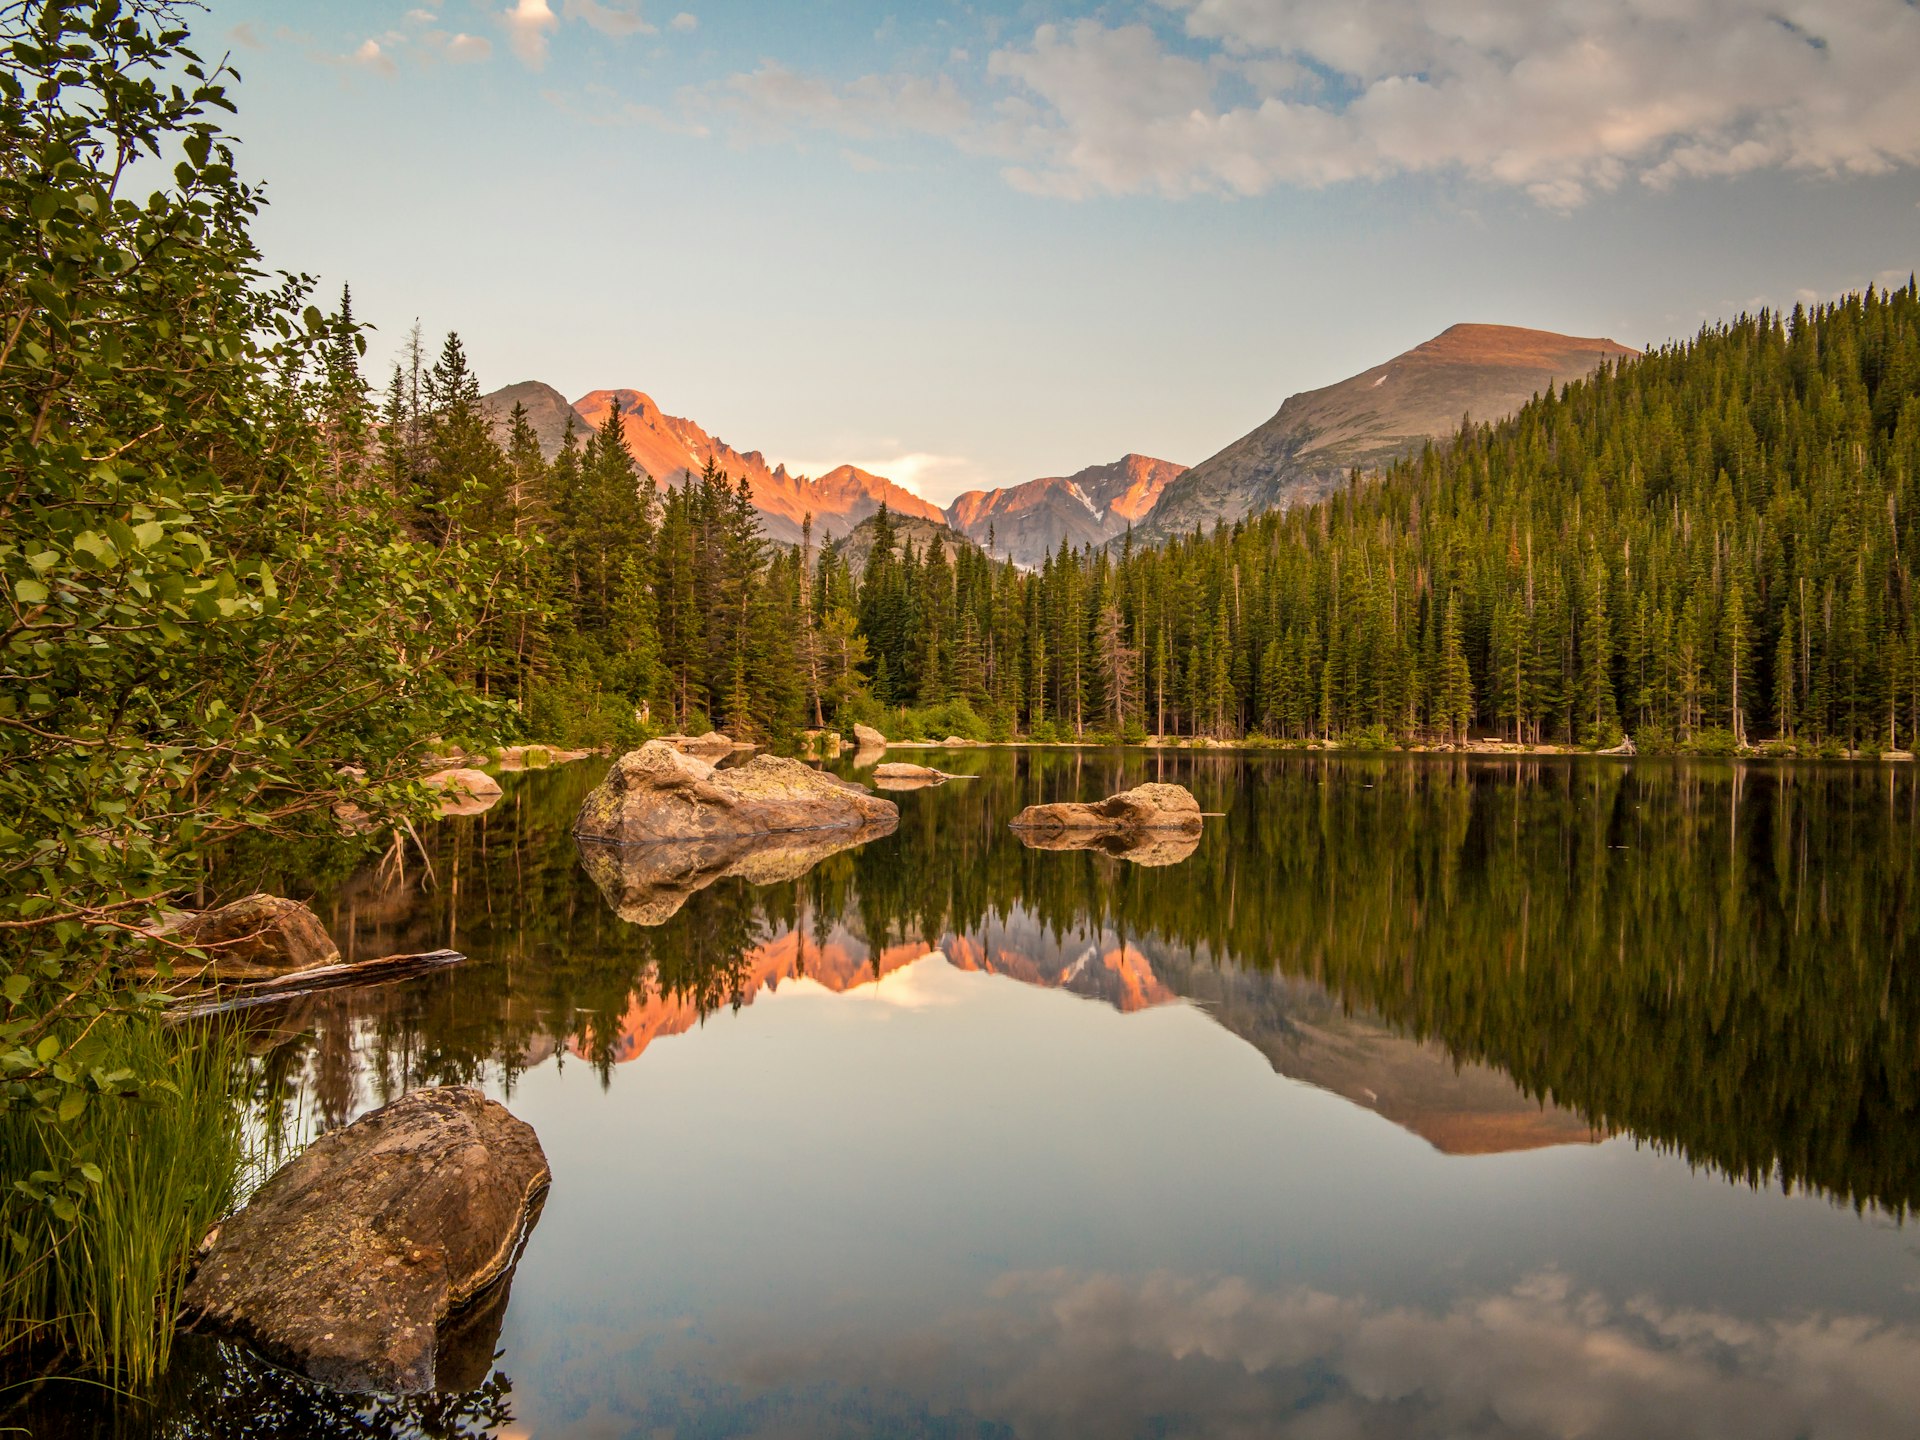 Sunset reflection of mountains and rocks at Bear Lake in Rocky Mountain National Park, Colorado